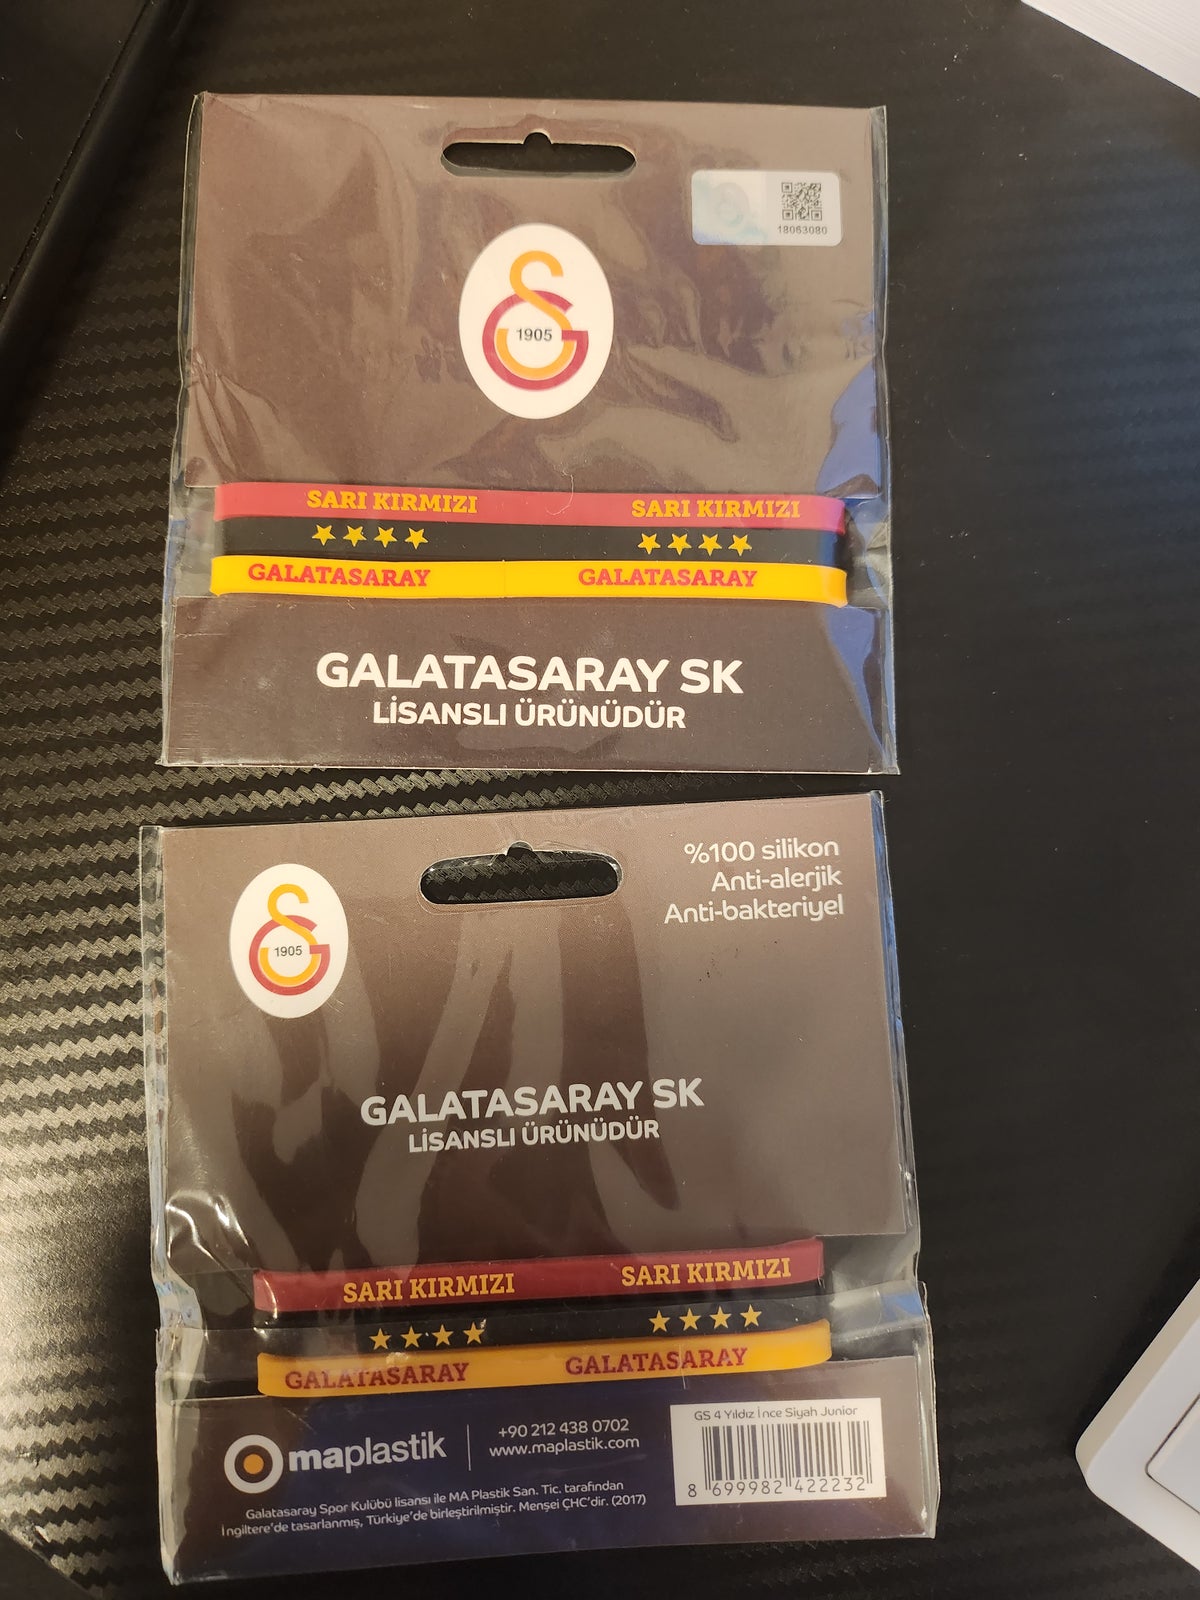 Armbånd, andet materiale, Galatasaray